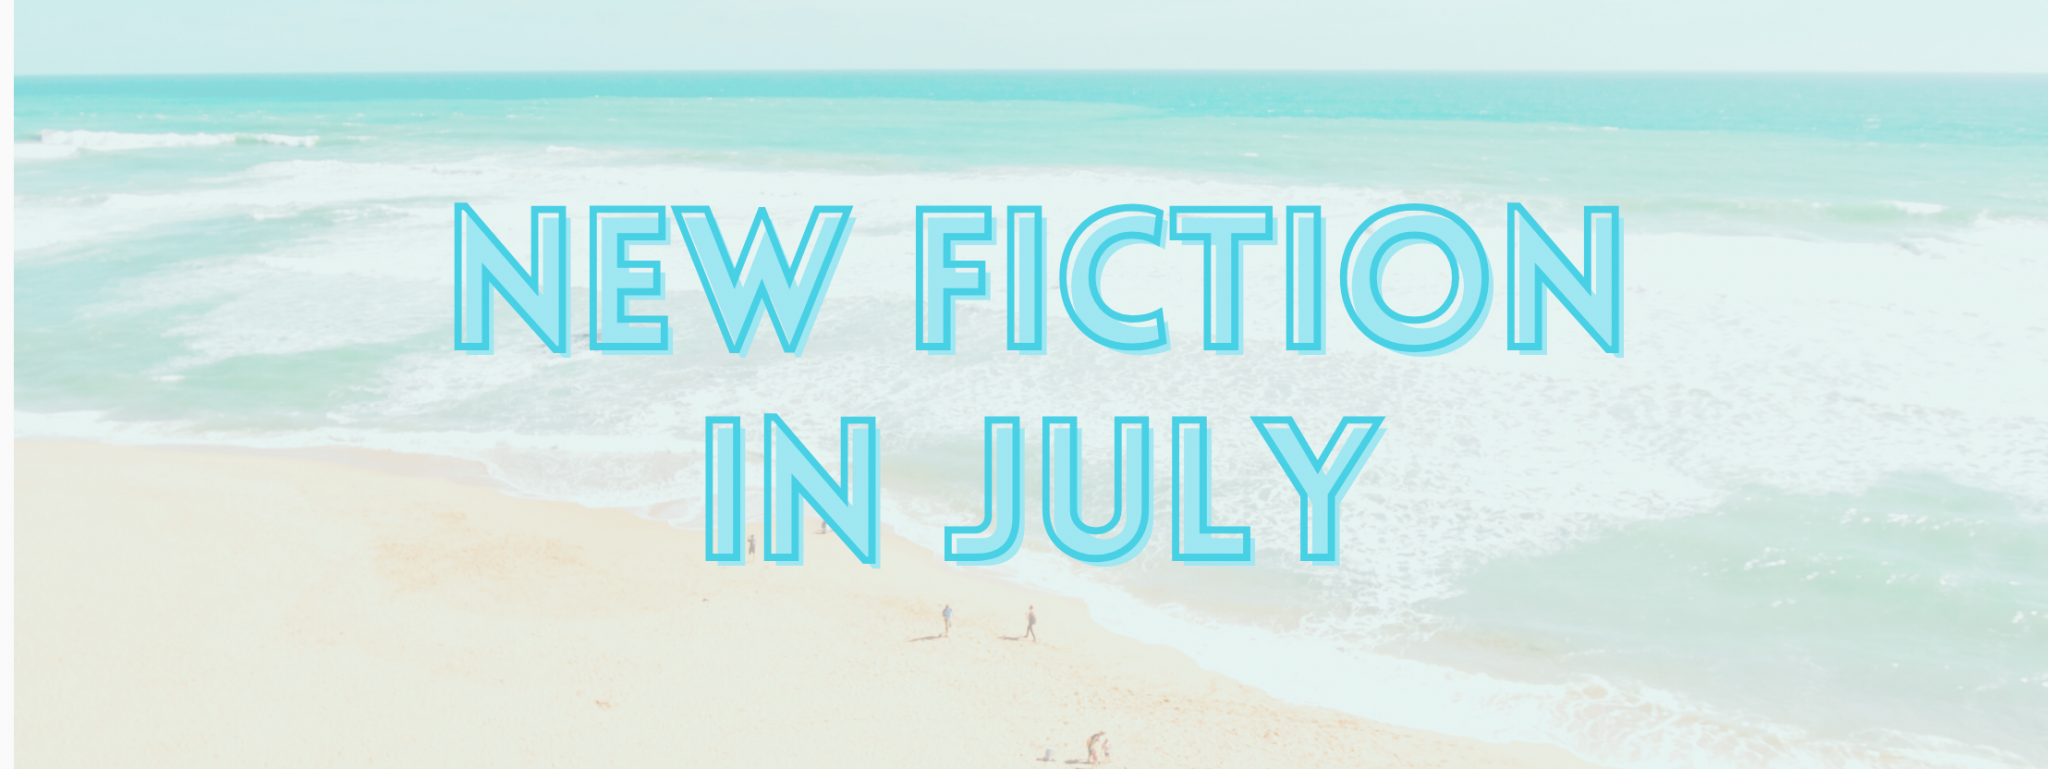 New Fiction in July